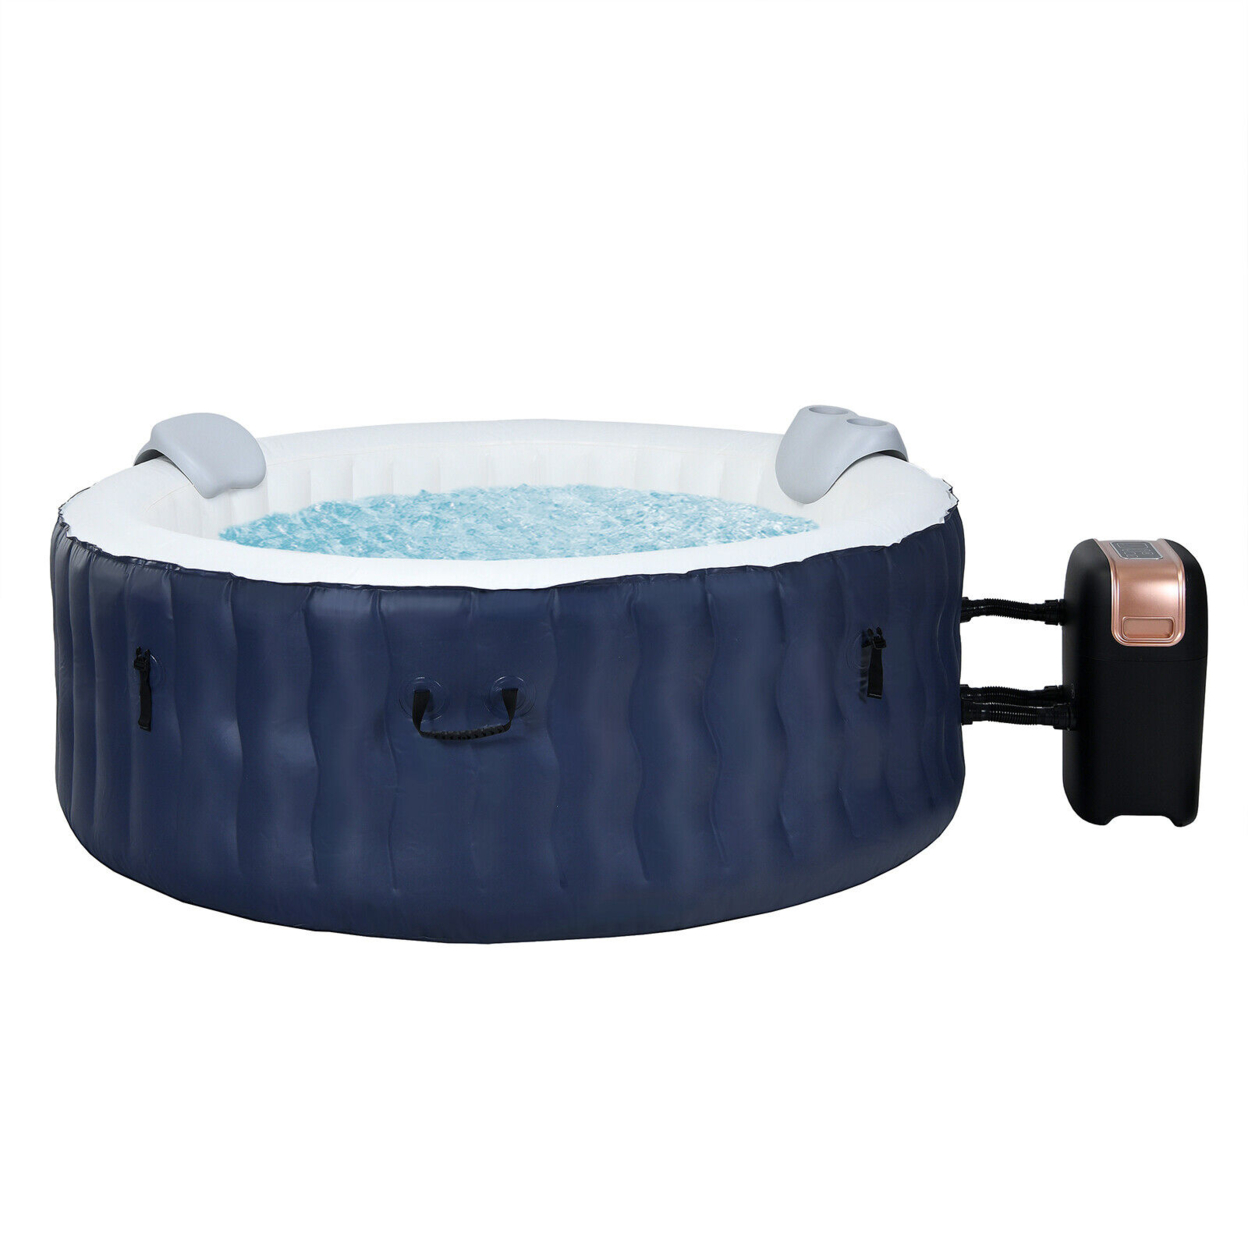 Inflatable Hot Tub Spa W/ 108 Massage Bubble Jets 4-Person Heated Spa For Patio Blue / Grey - Grey